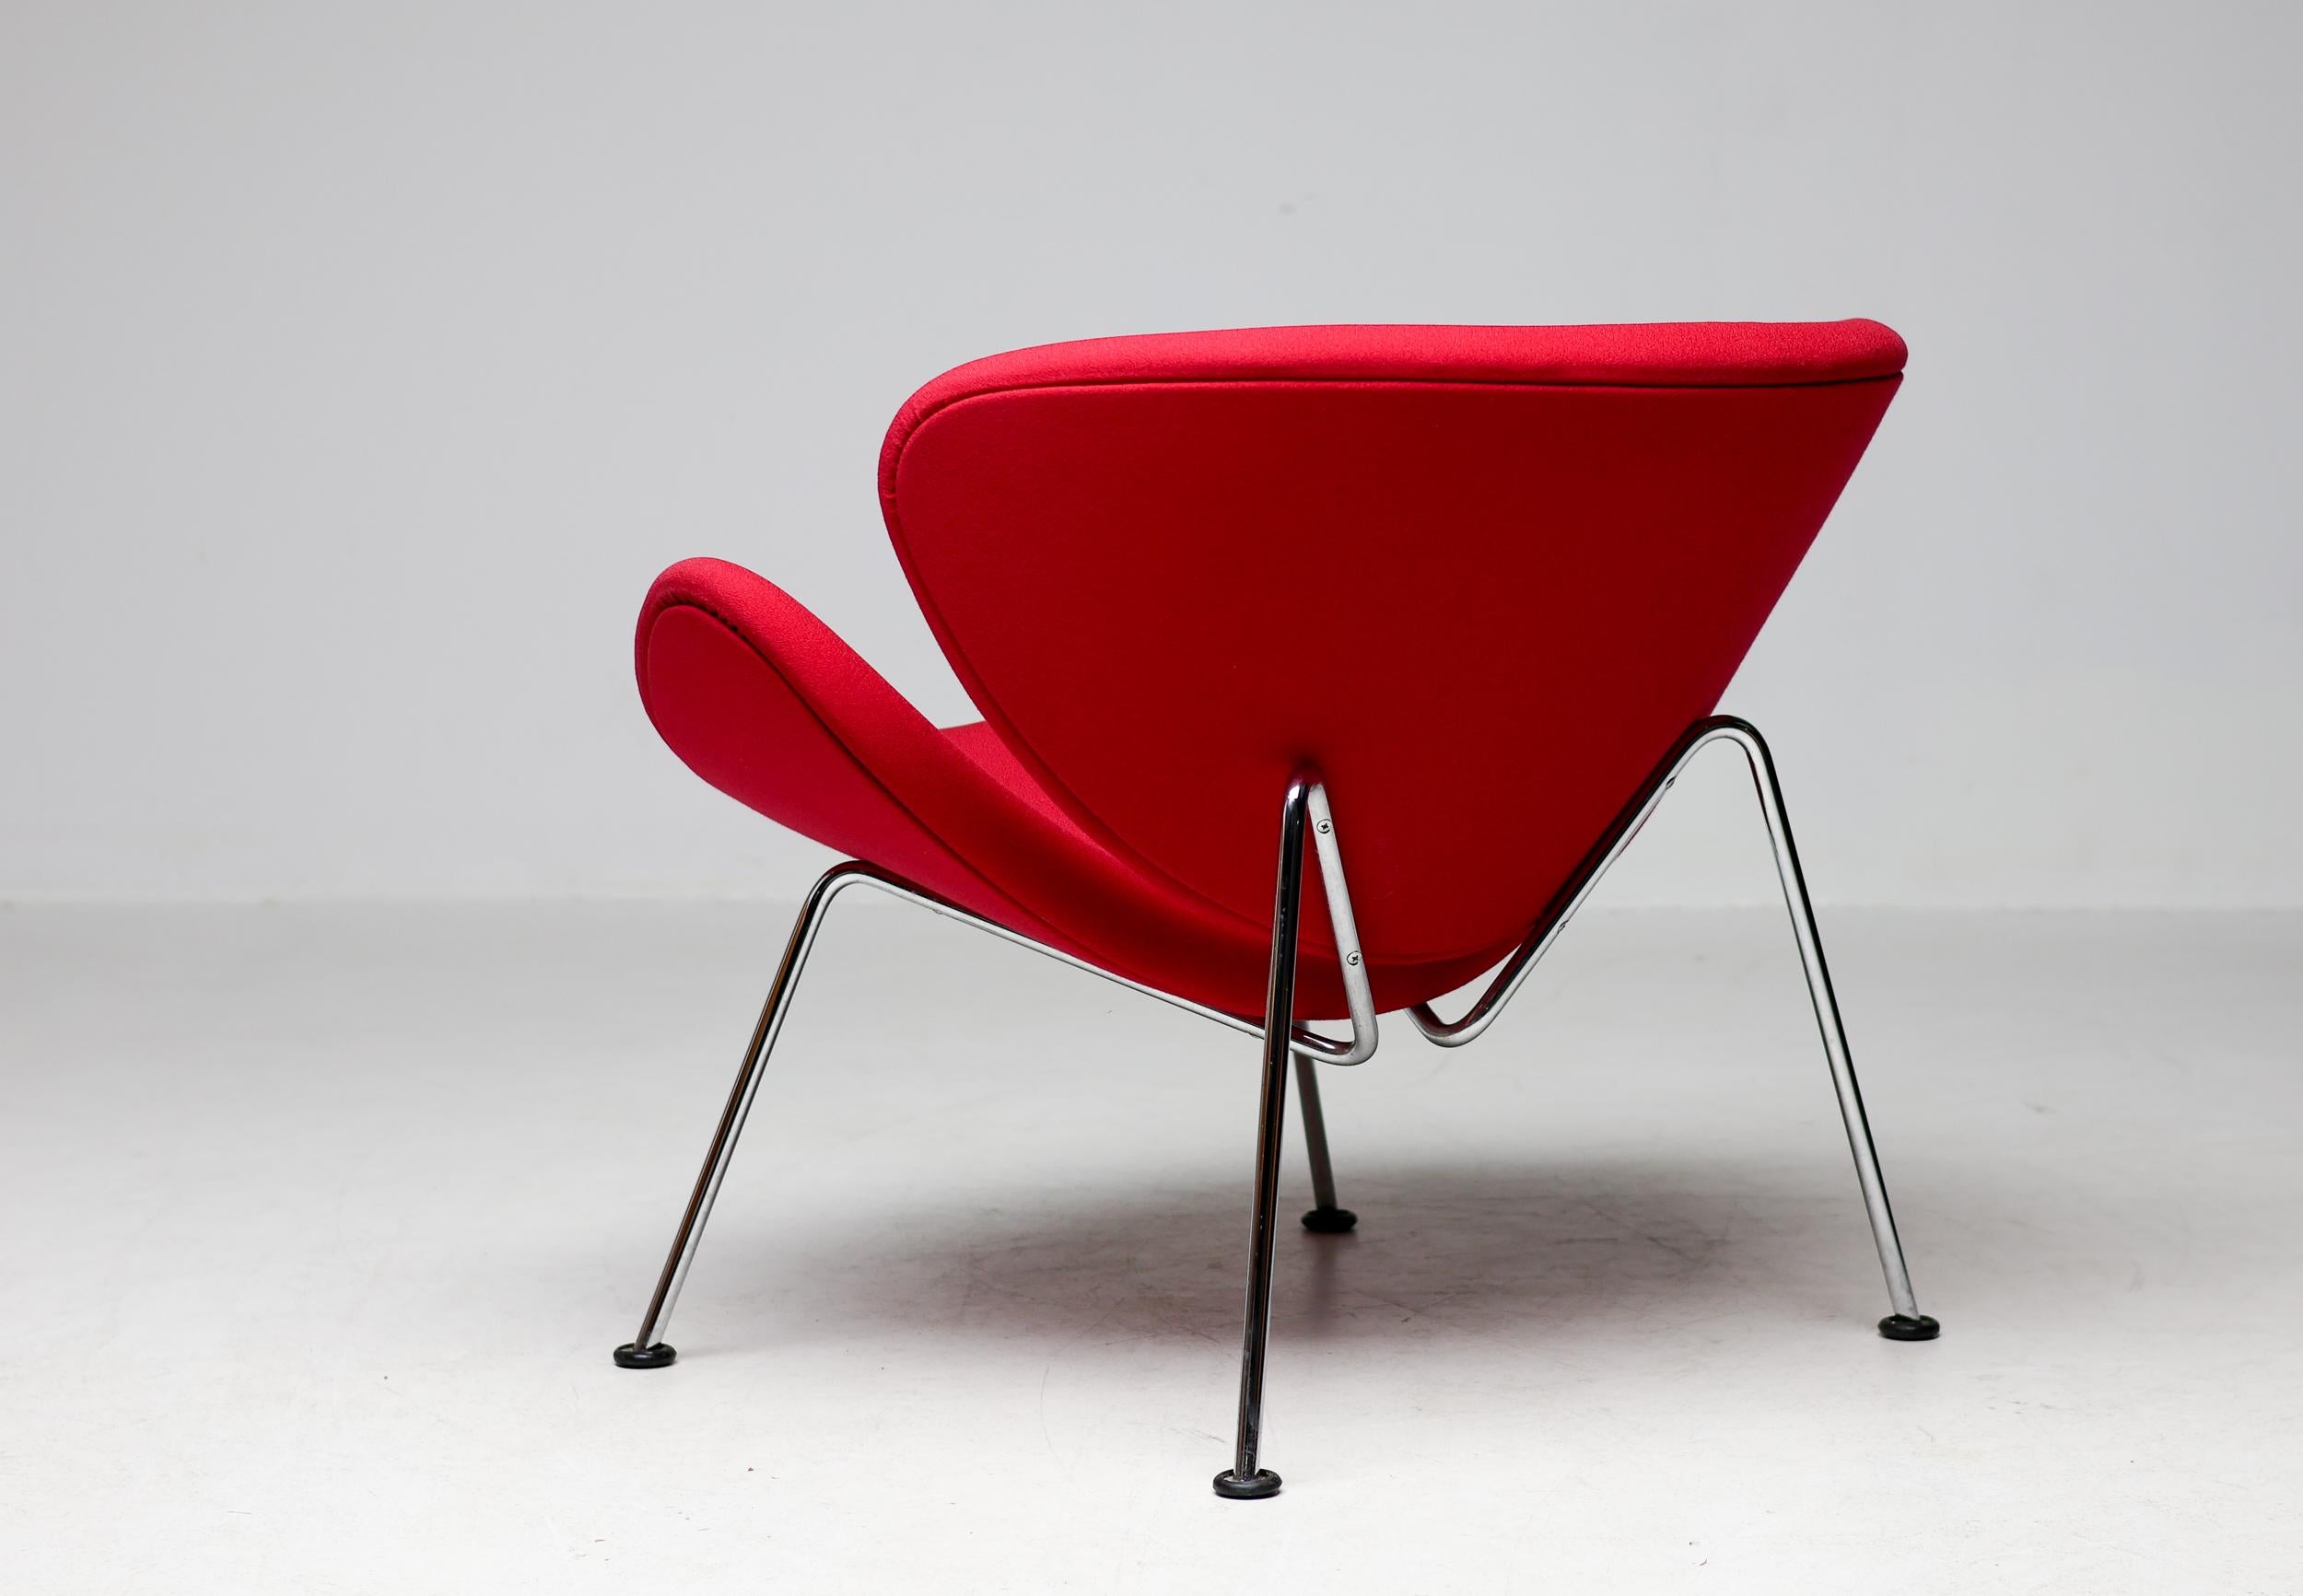 Artifort Model F437, or more famously nicknamed the Orange Slice Chair, was designed by French designer Pierre Paulin for the Dutch manufacturer Artifort in Maastricht in the mid 20th century after he became acquainted with the technique of bending